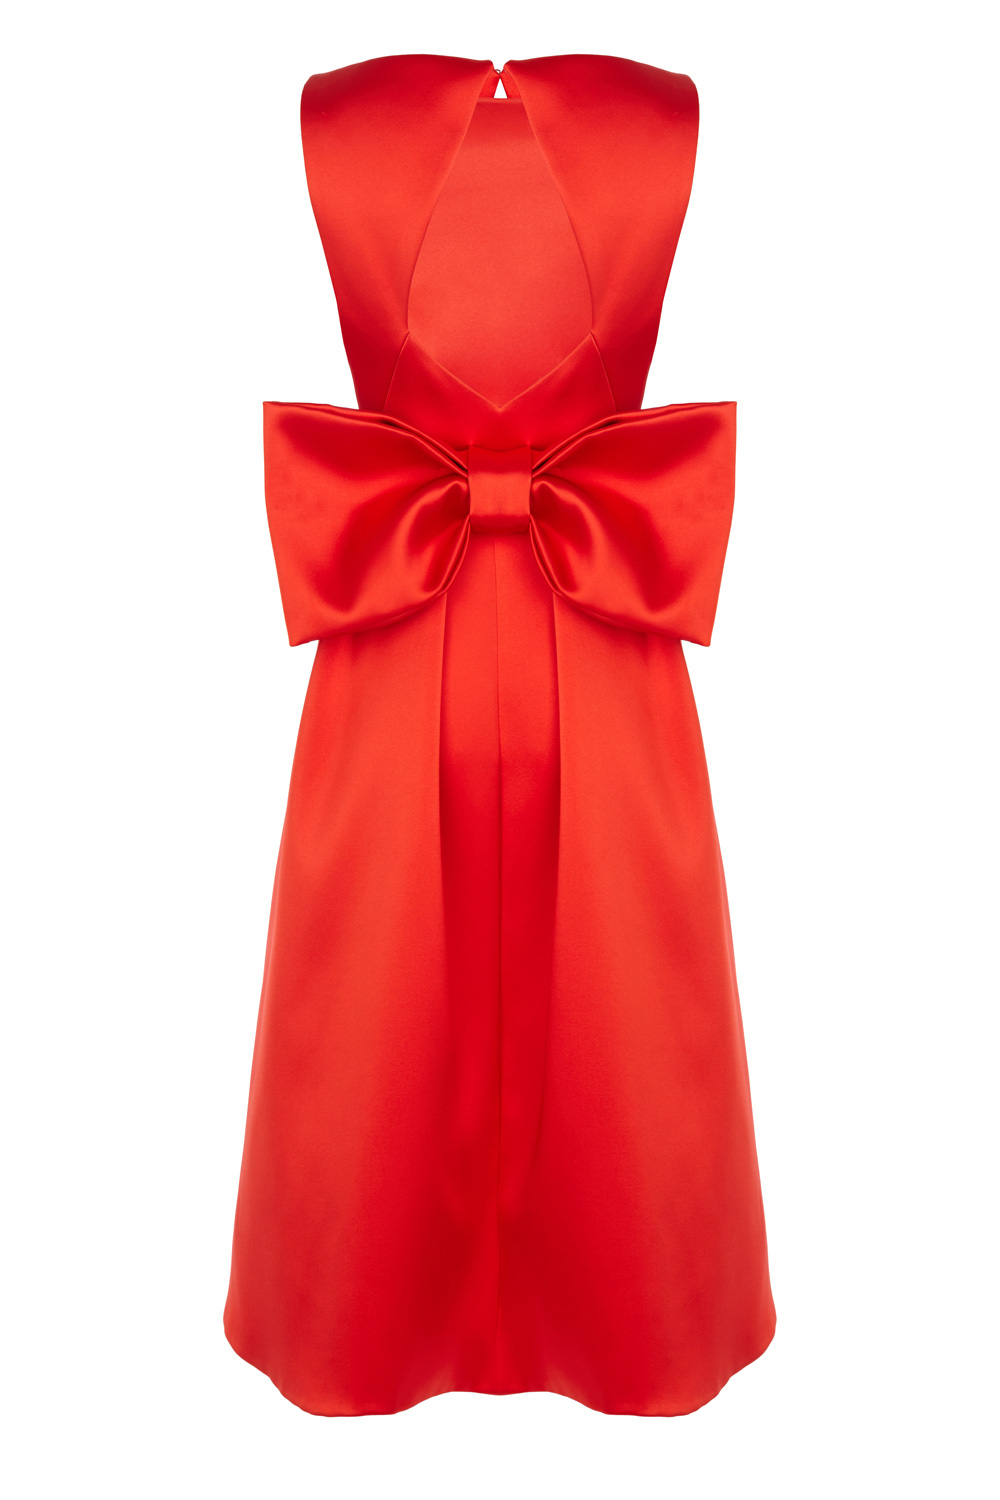 Christmas party dresses for women over 40